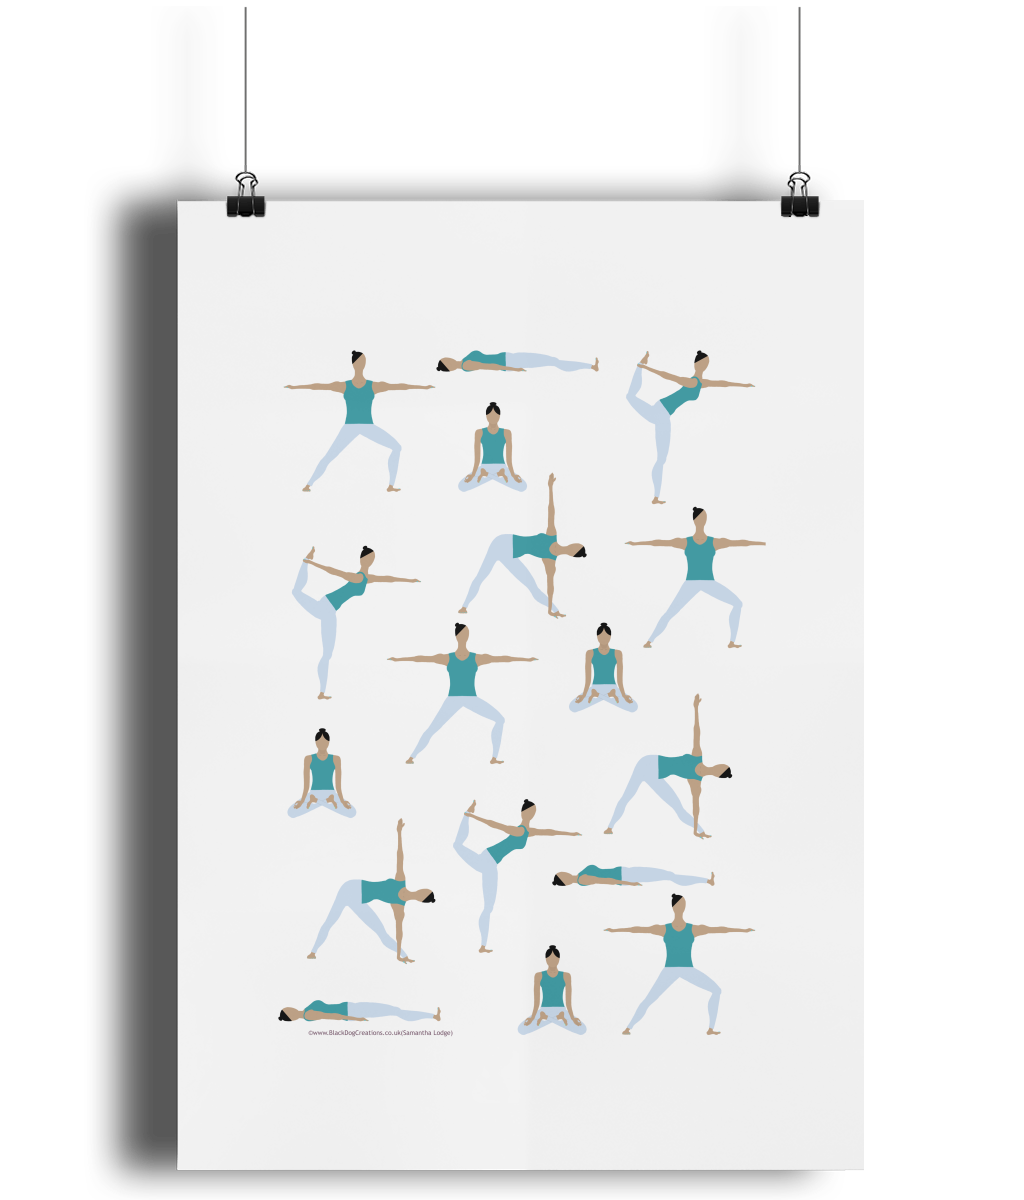 Women In Warrior 3 Yoga Pose Hand Drawn Outline Doodle Icon. Yoga Poses,  Balance, Fitness And Health Concept. Vector Sketch Illustration For Print,  Web, Mobile And Infographics On White Background. Royalty Free